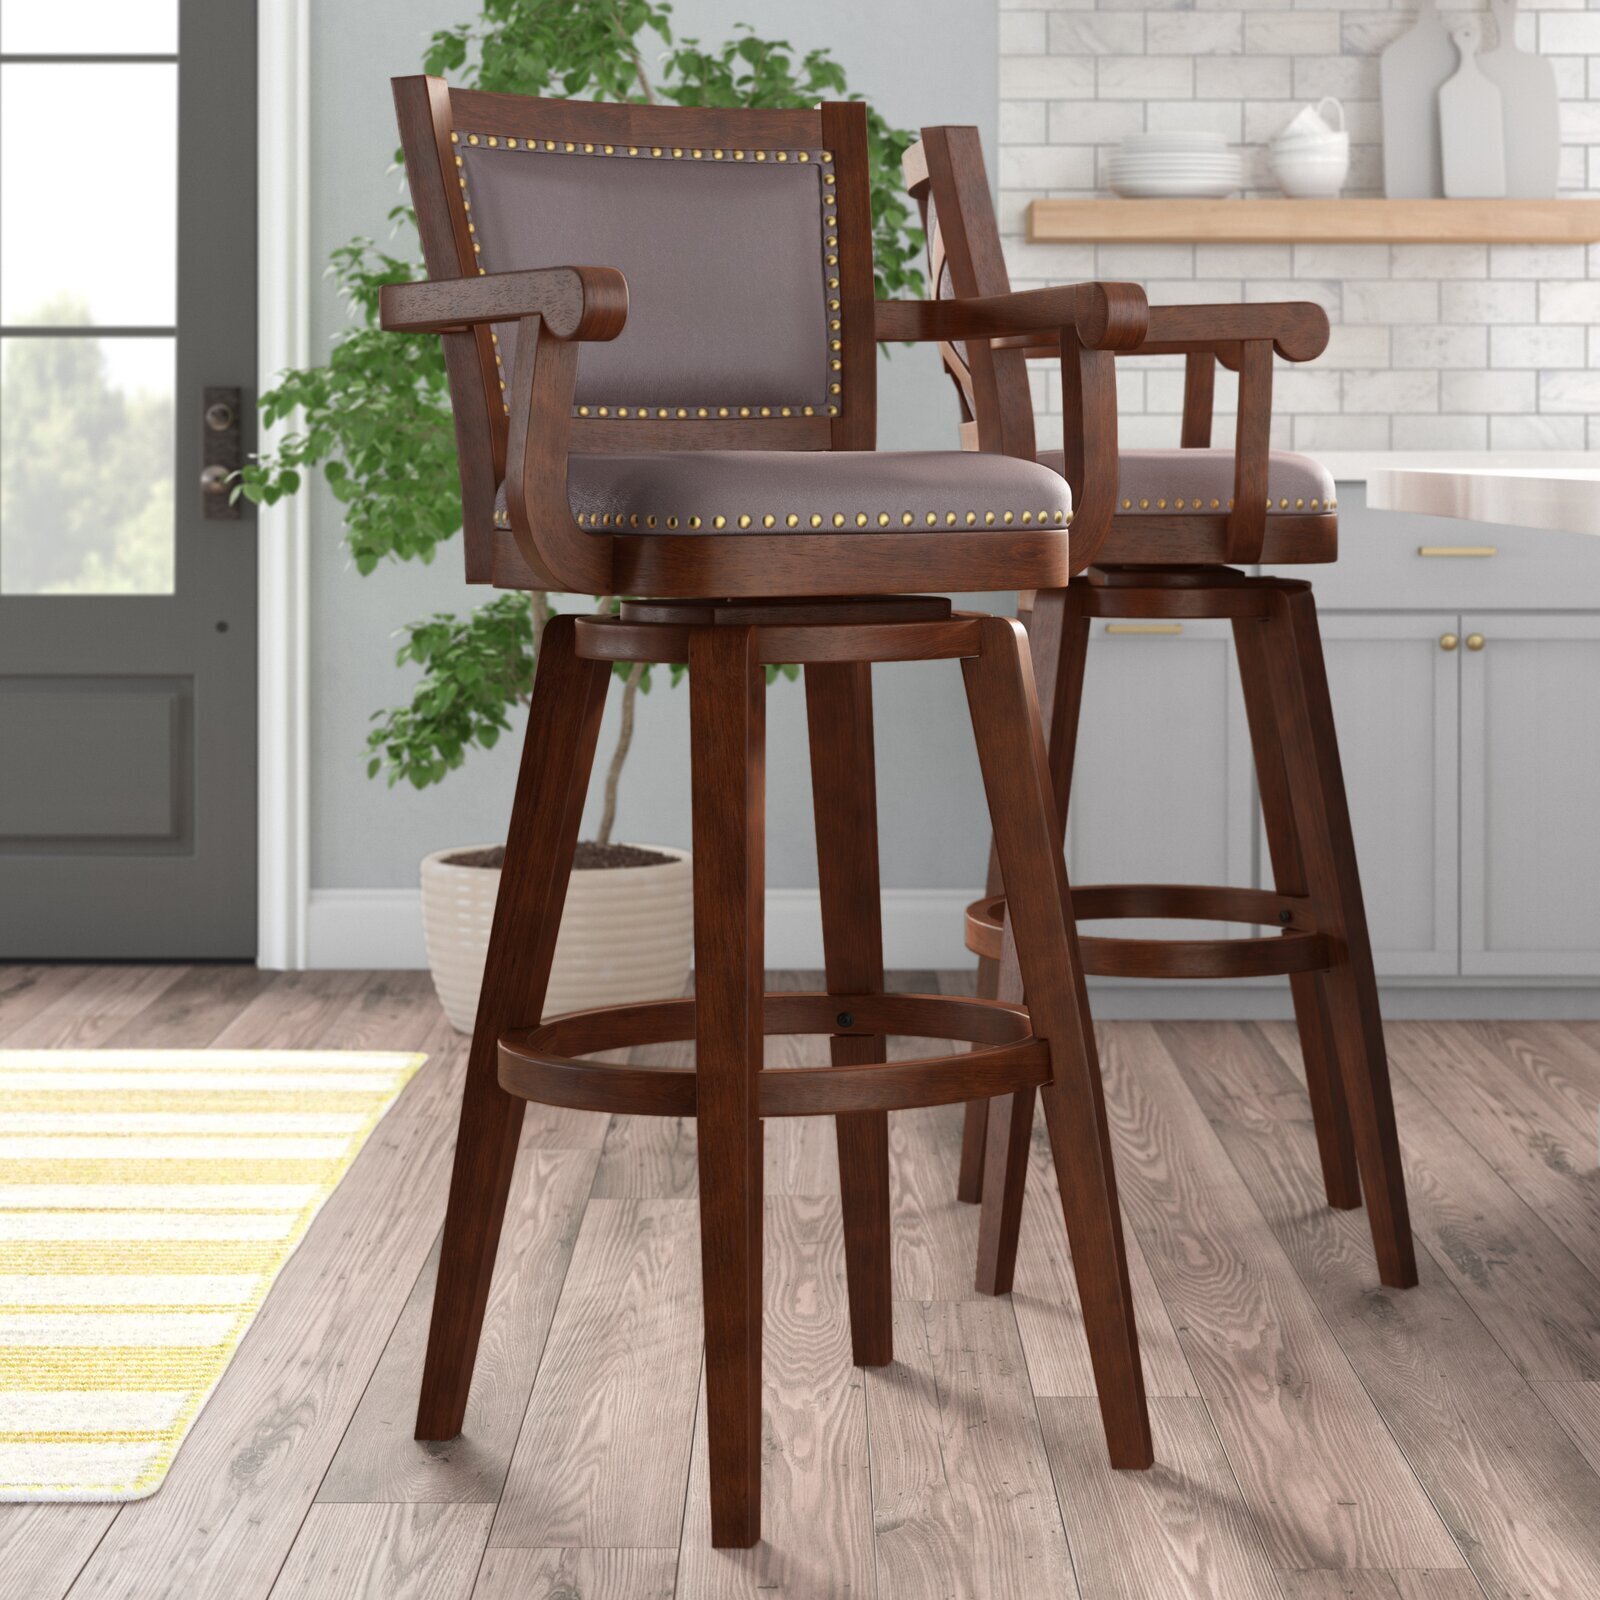 Solid wood 36 inch seat height bar stool